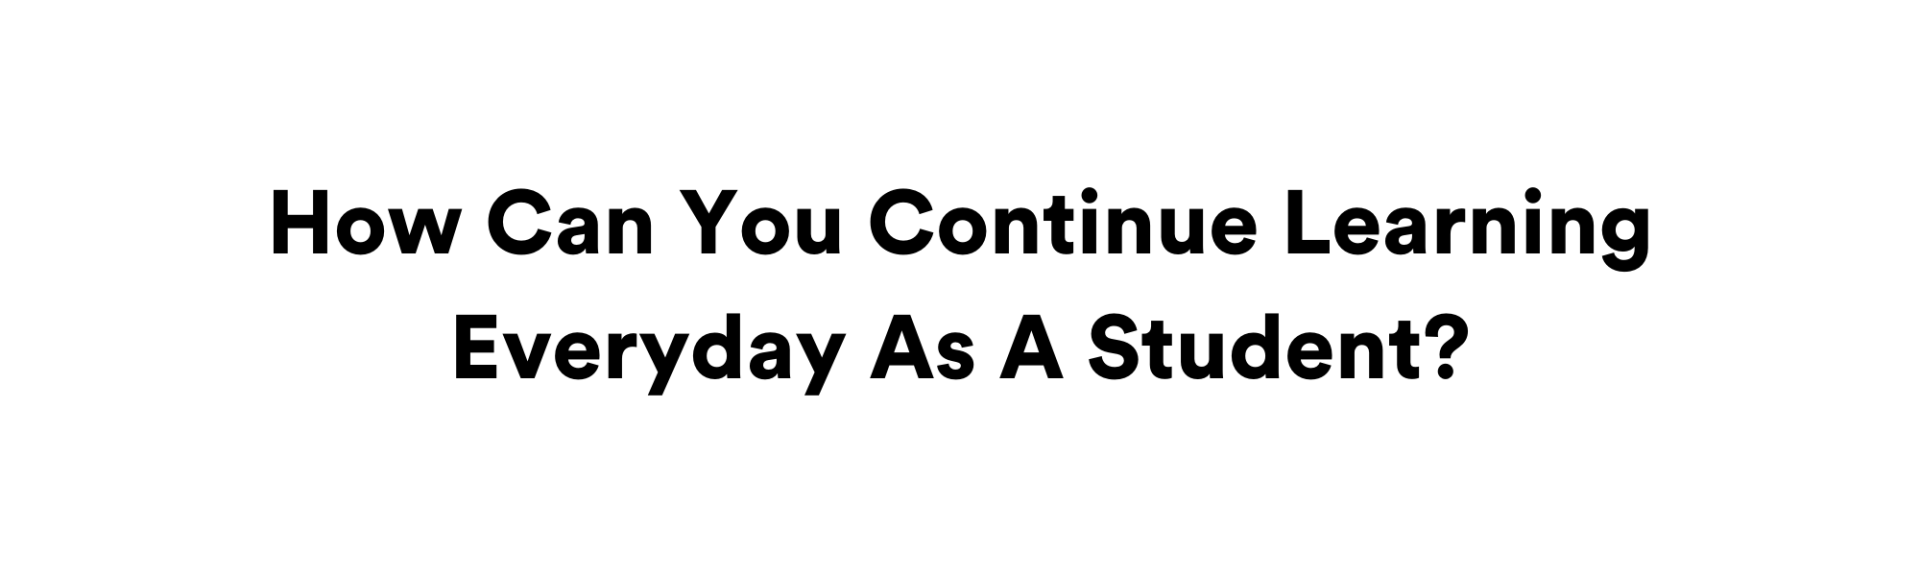 How Can You Continue Learning Everyday As A Student?